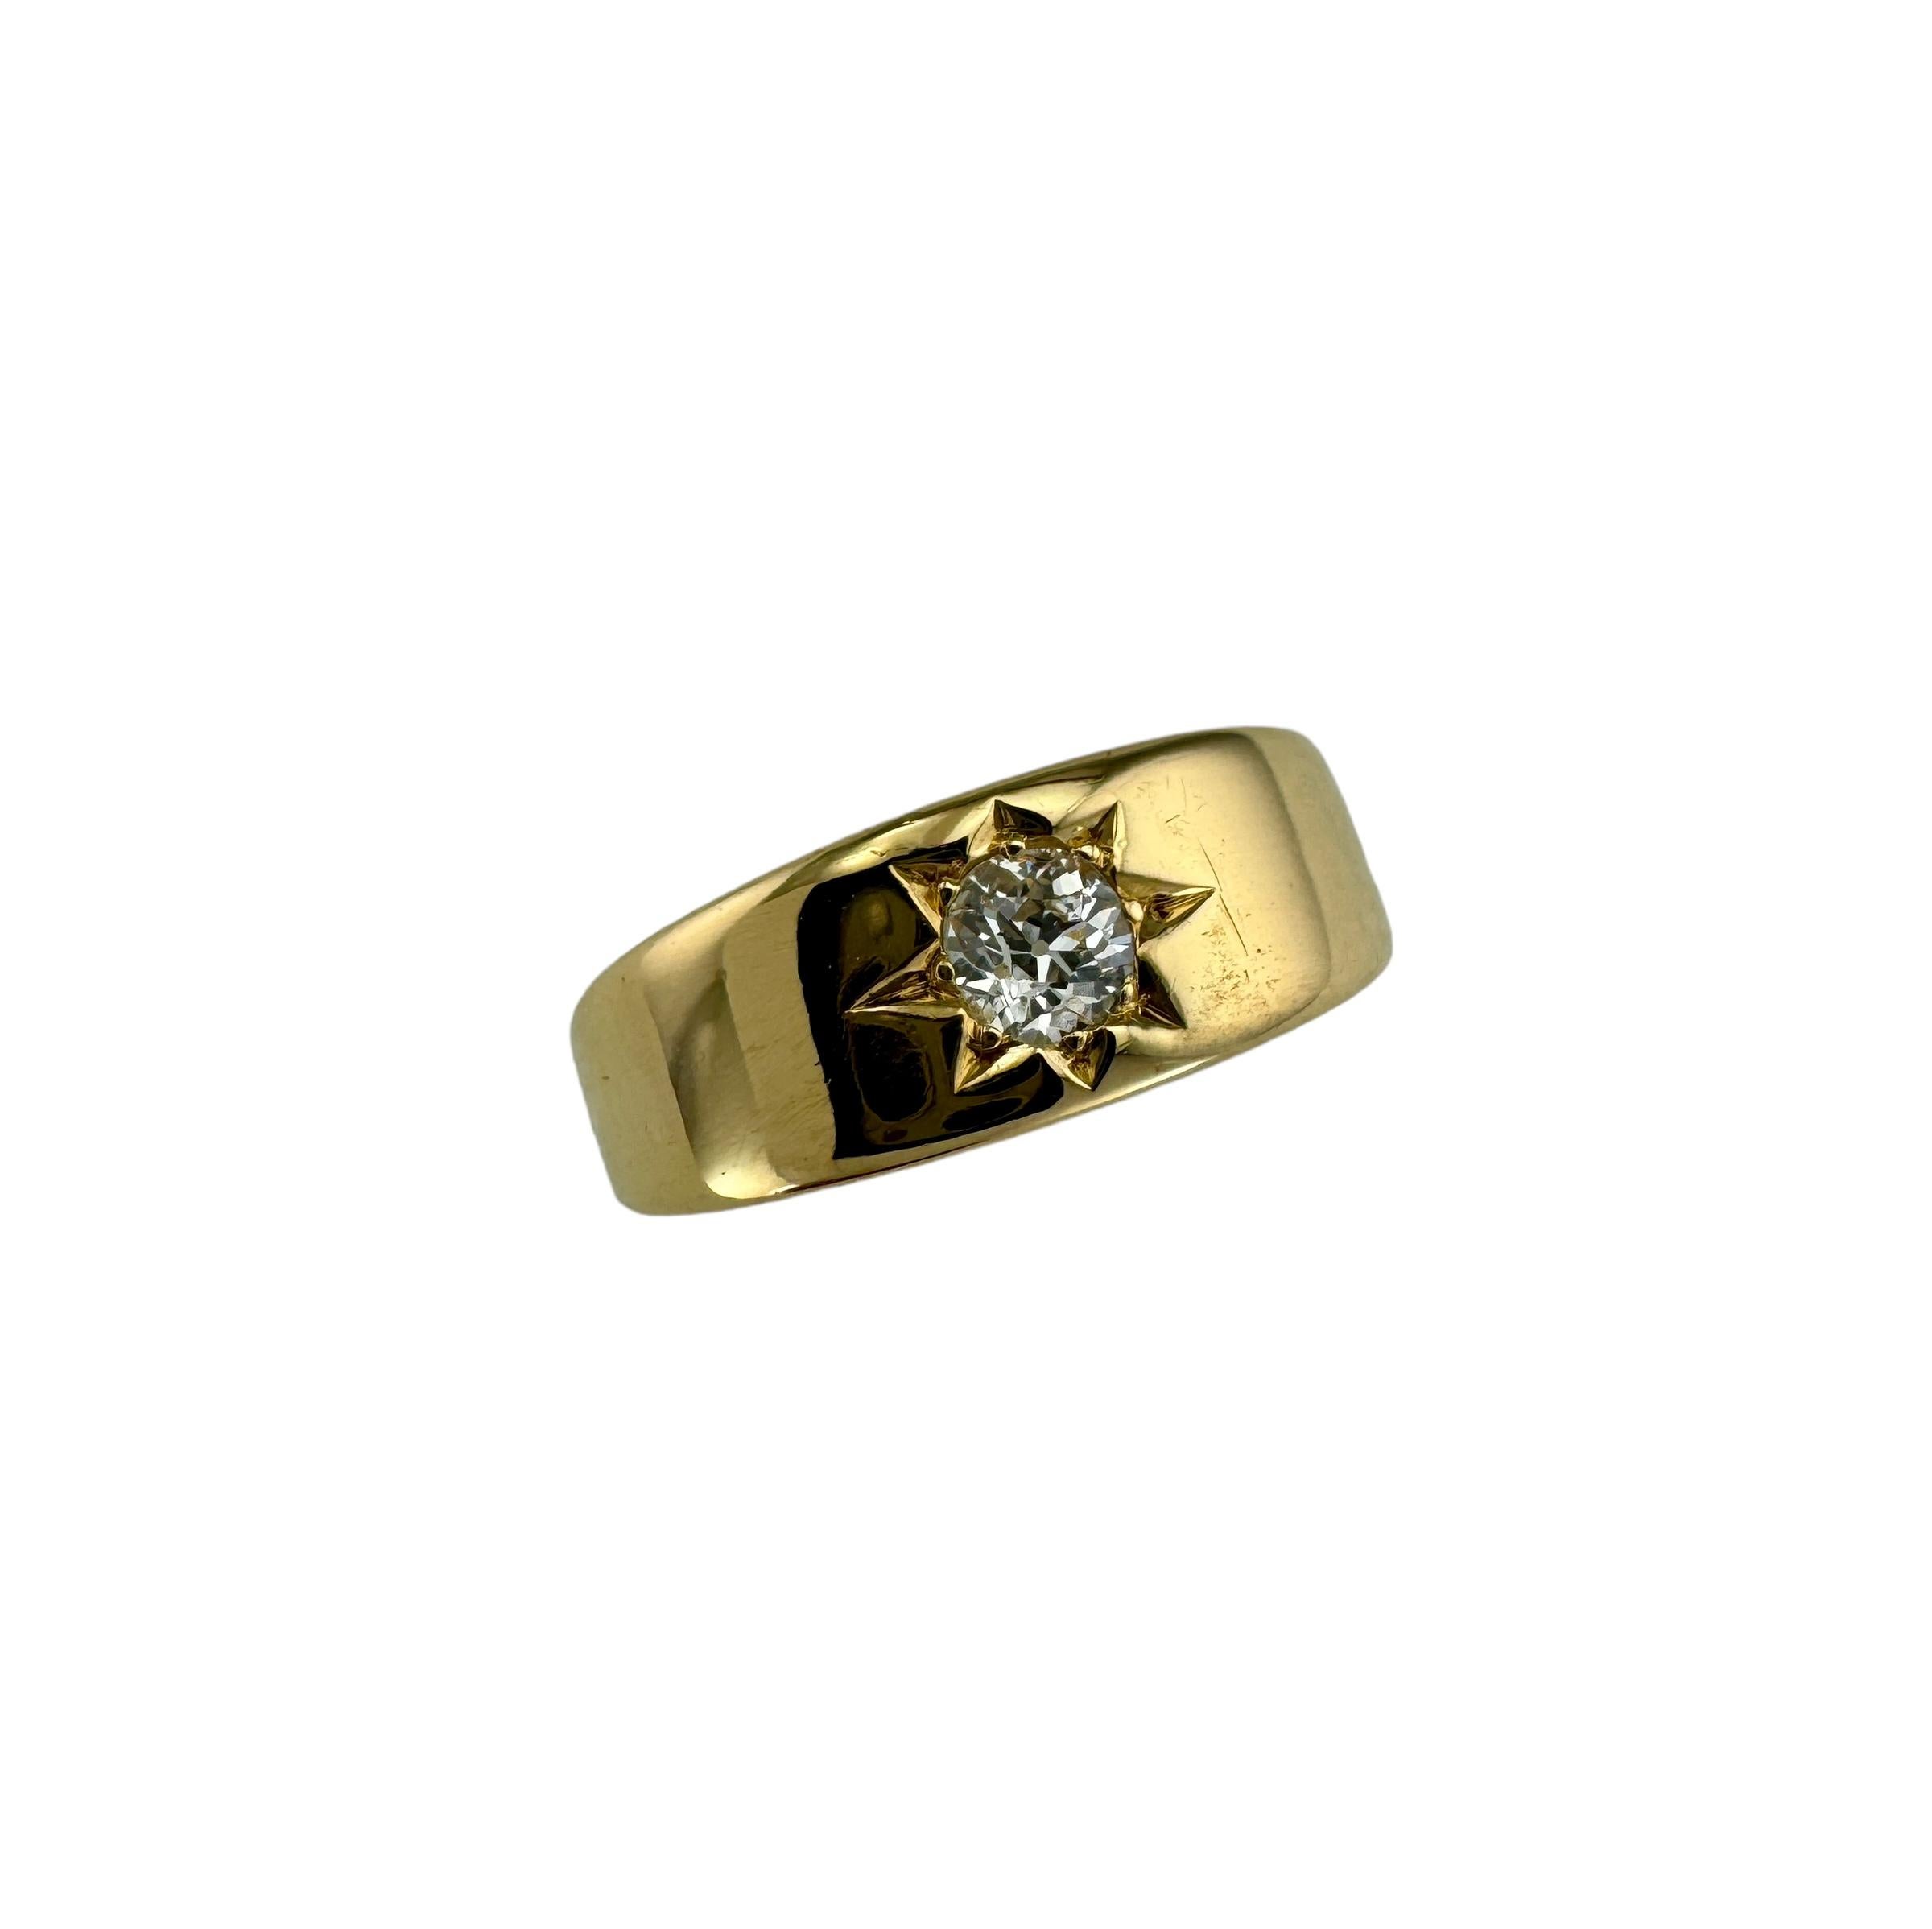 Art Deco diamond yellow gold gypsy ring, circa 1929.

This vintage yellow gold gypsy ring is star set with one Old European cut diamond,  It was made in London around 1929 per it's hallmarks. And this is your basic everyday diamond ring. The diamond